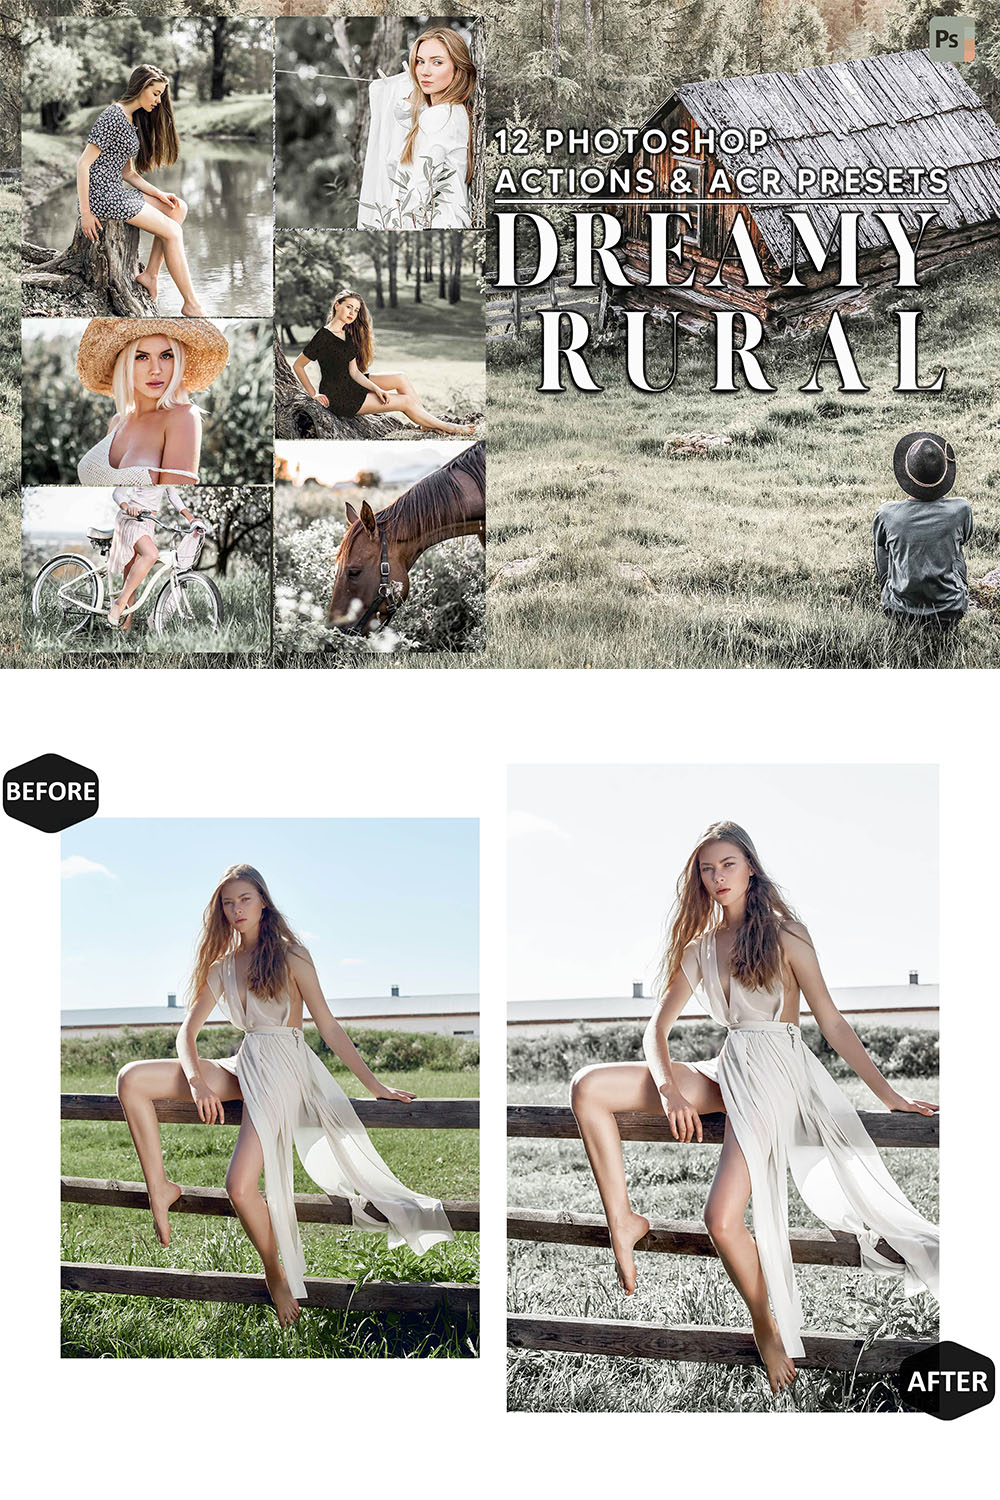 12 Photoshop Actions, Dreamy Rural Ps Action, Rustic ACR Preset, Bright Ps Filter, Portrait And Lifestyle Theme For Instagram, Blogger pinterest preview image.